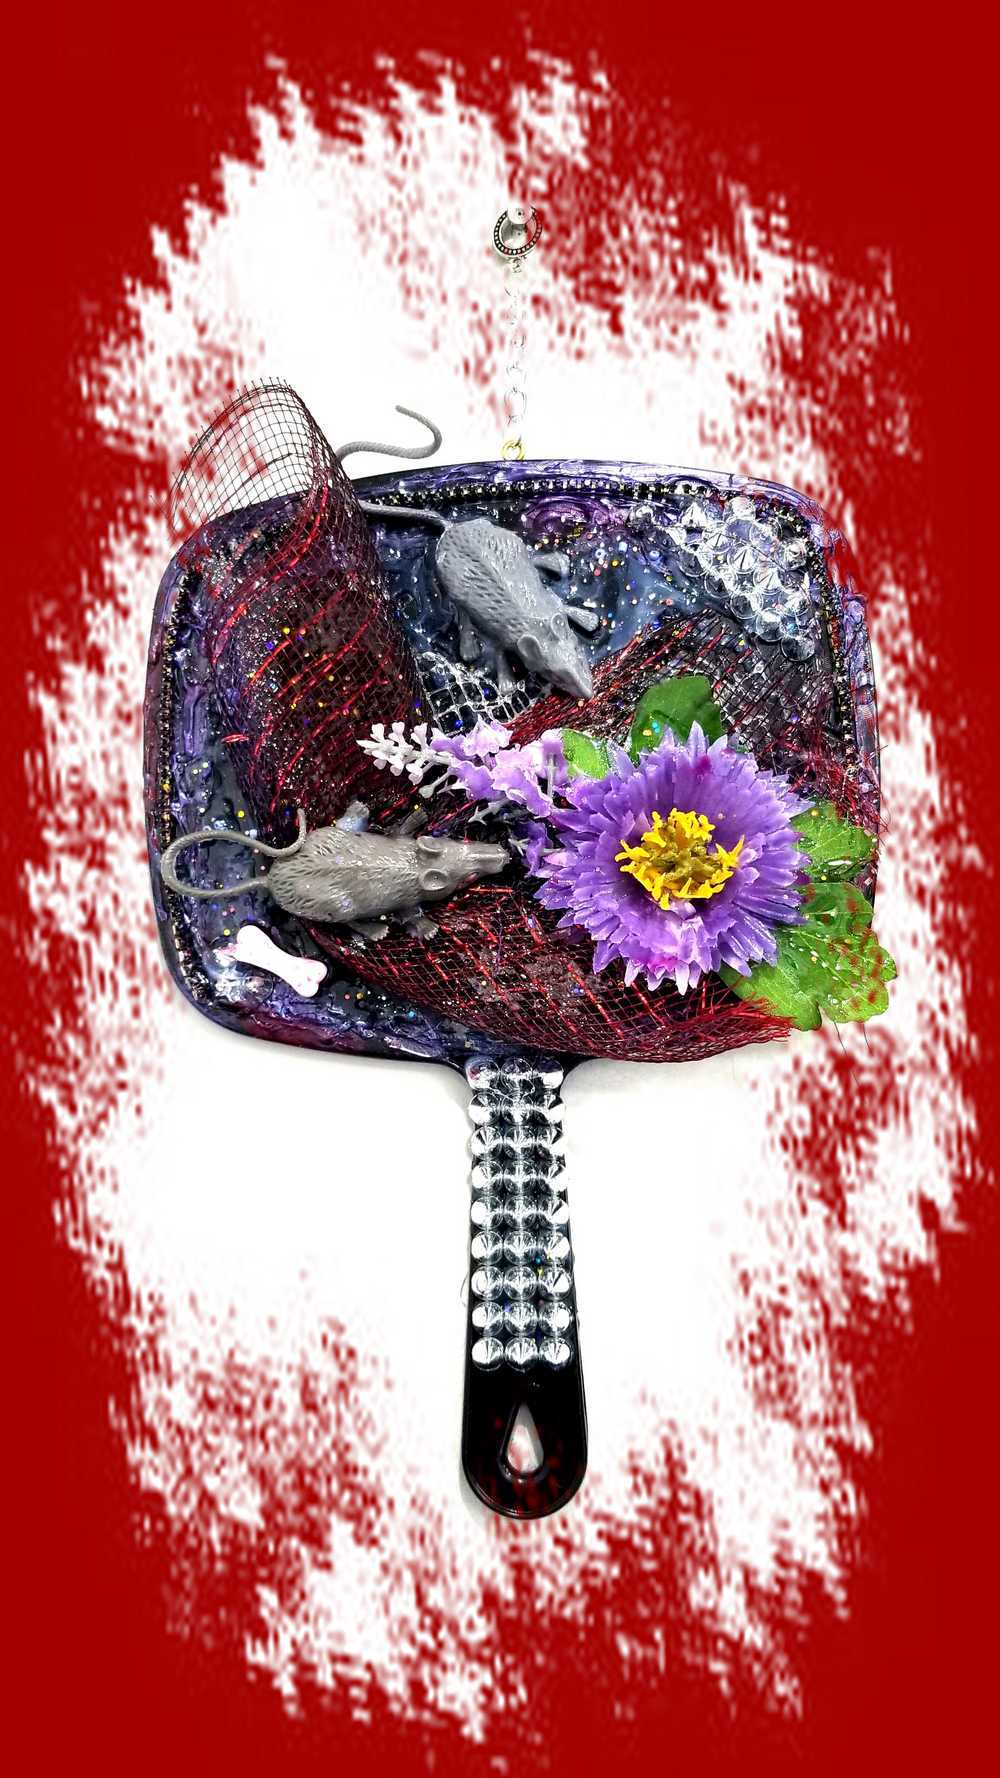 Black Studded Hand Held Mirror with Rats and Purple Flowers. Punk Art